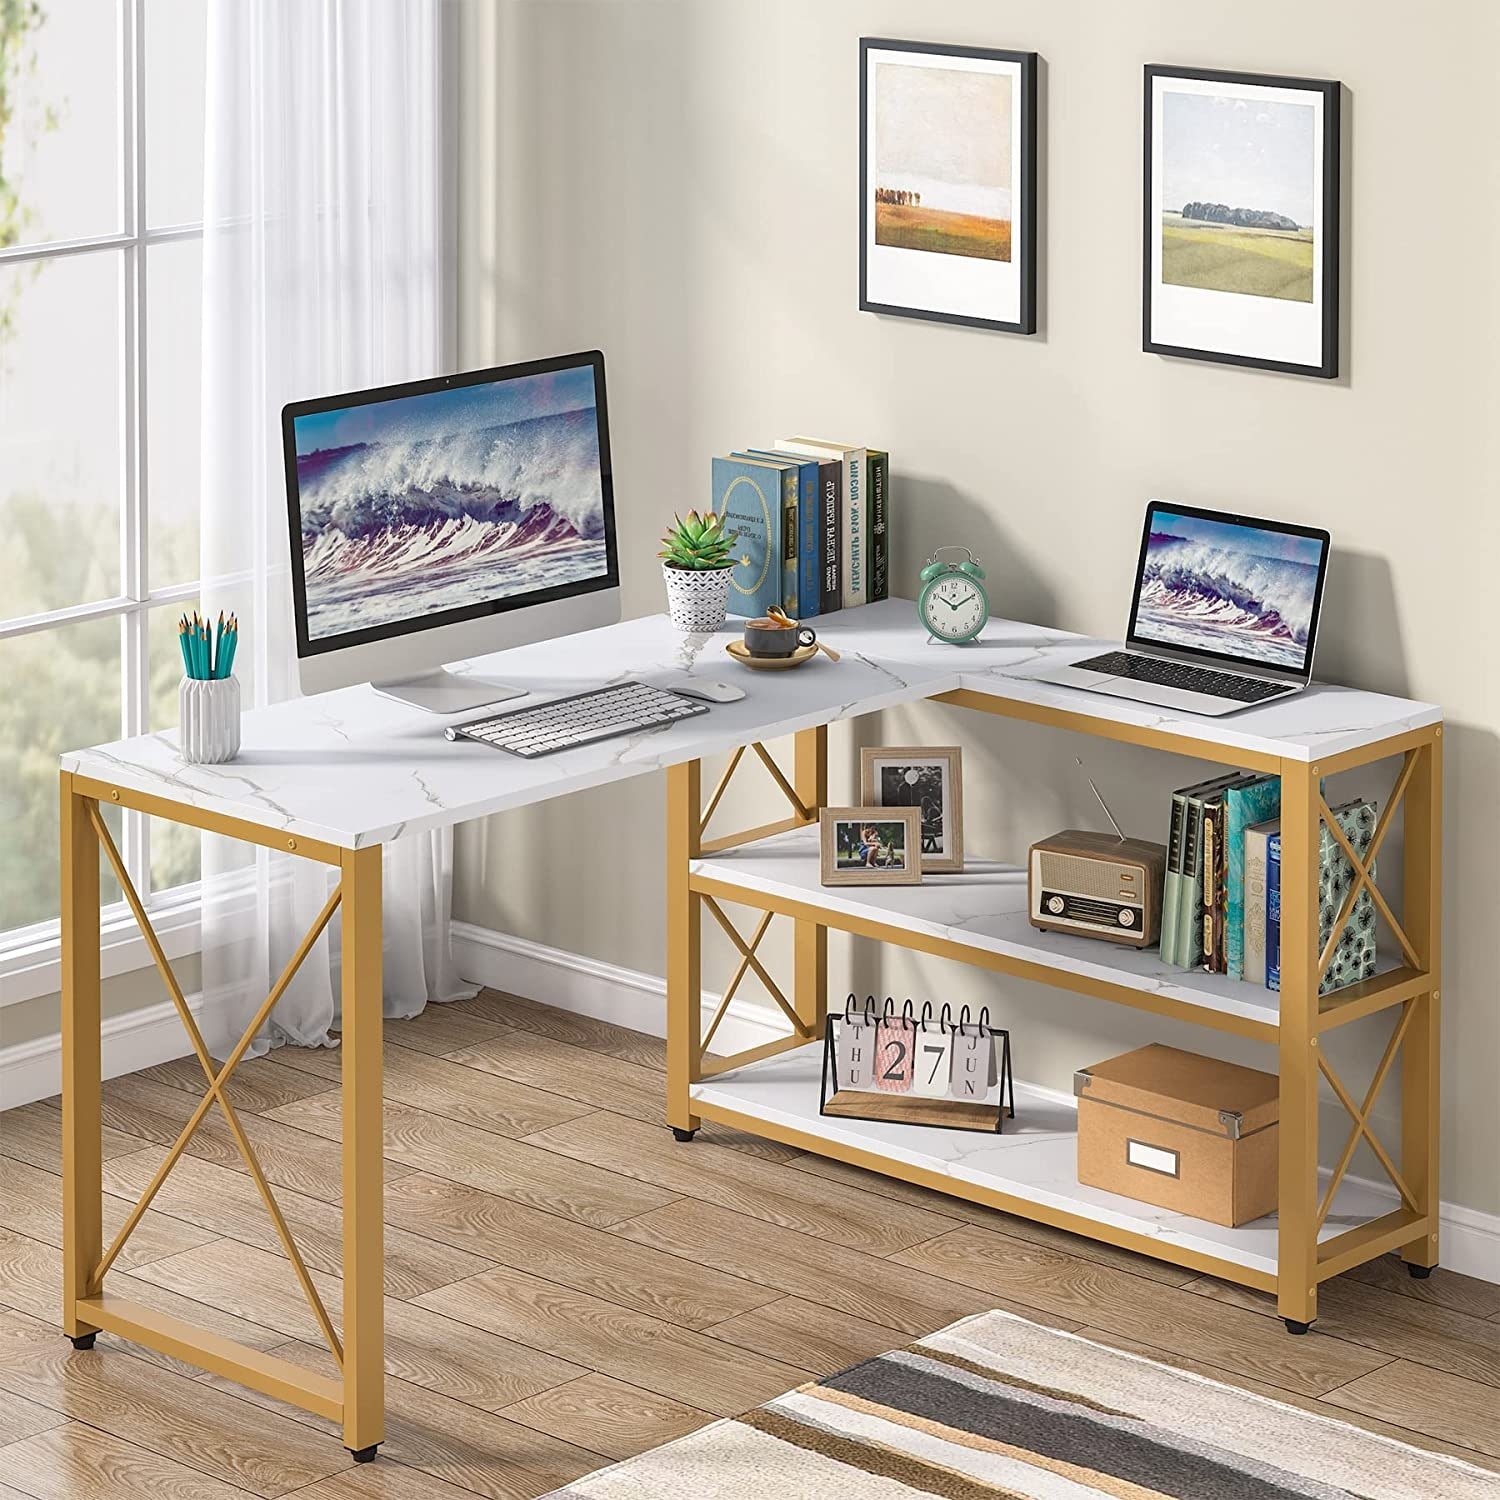 https://ak1.ostkcdn.com/images/products/is/images/direct/162091f143aa4363a24c06a8108f102c320f15cc/Industrial-L-Shaped-Desk-with-Storage-Shelves%2C-Corner-Computer-Desk-PC-Laptop-Study-Table-Workstation.jpg